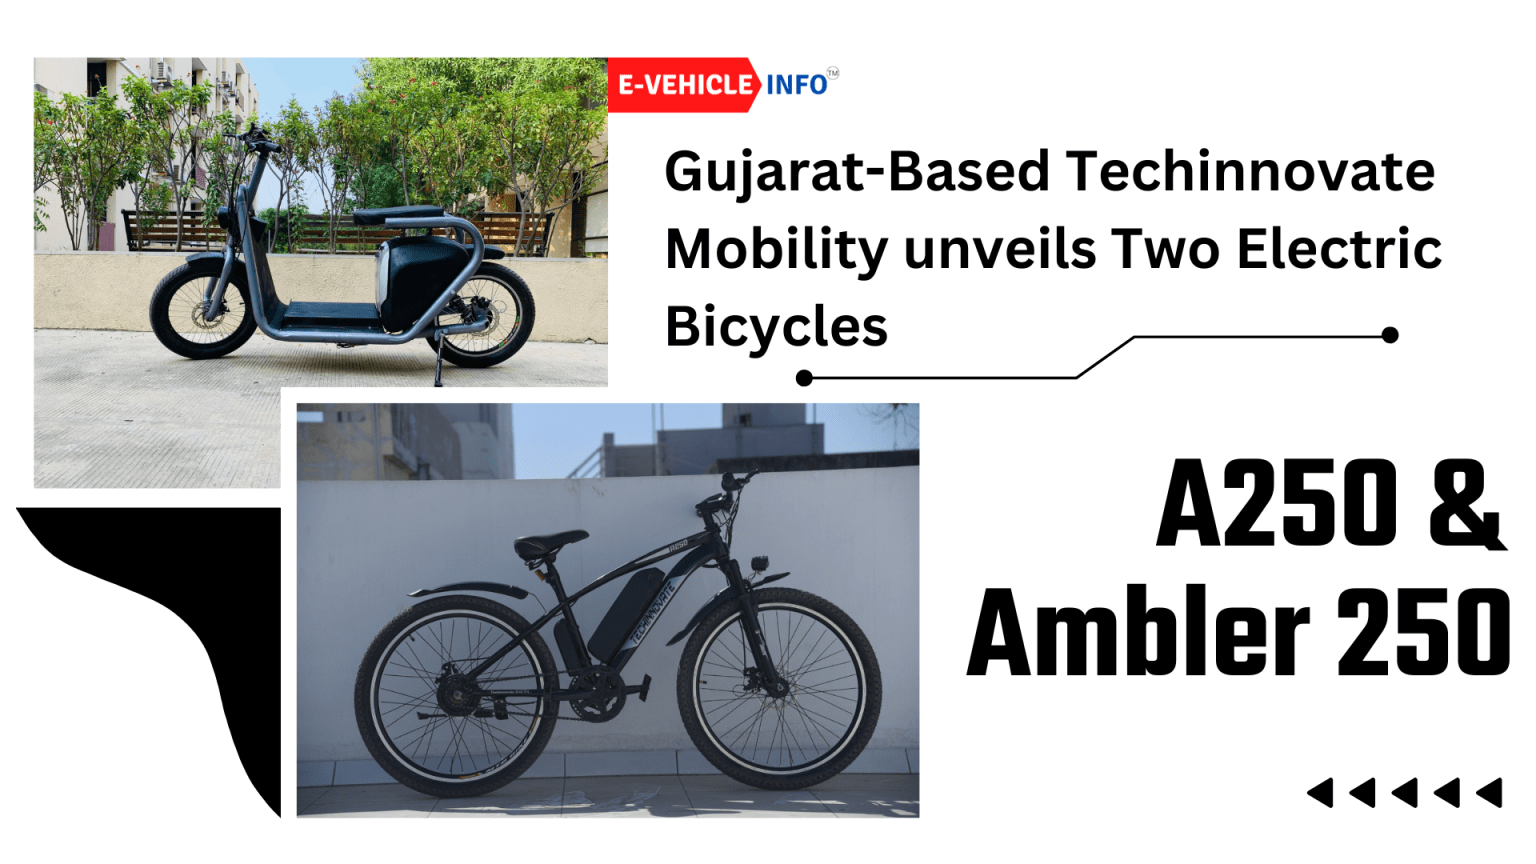 GujaratBased Techinnovate Mobility unveils Two Electric Bicycles "A250